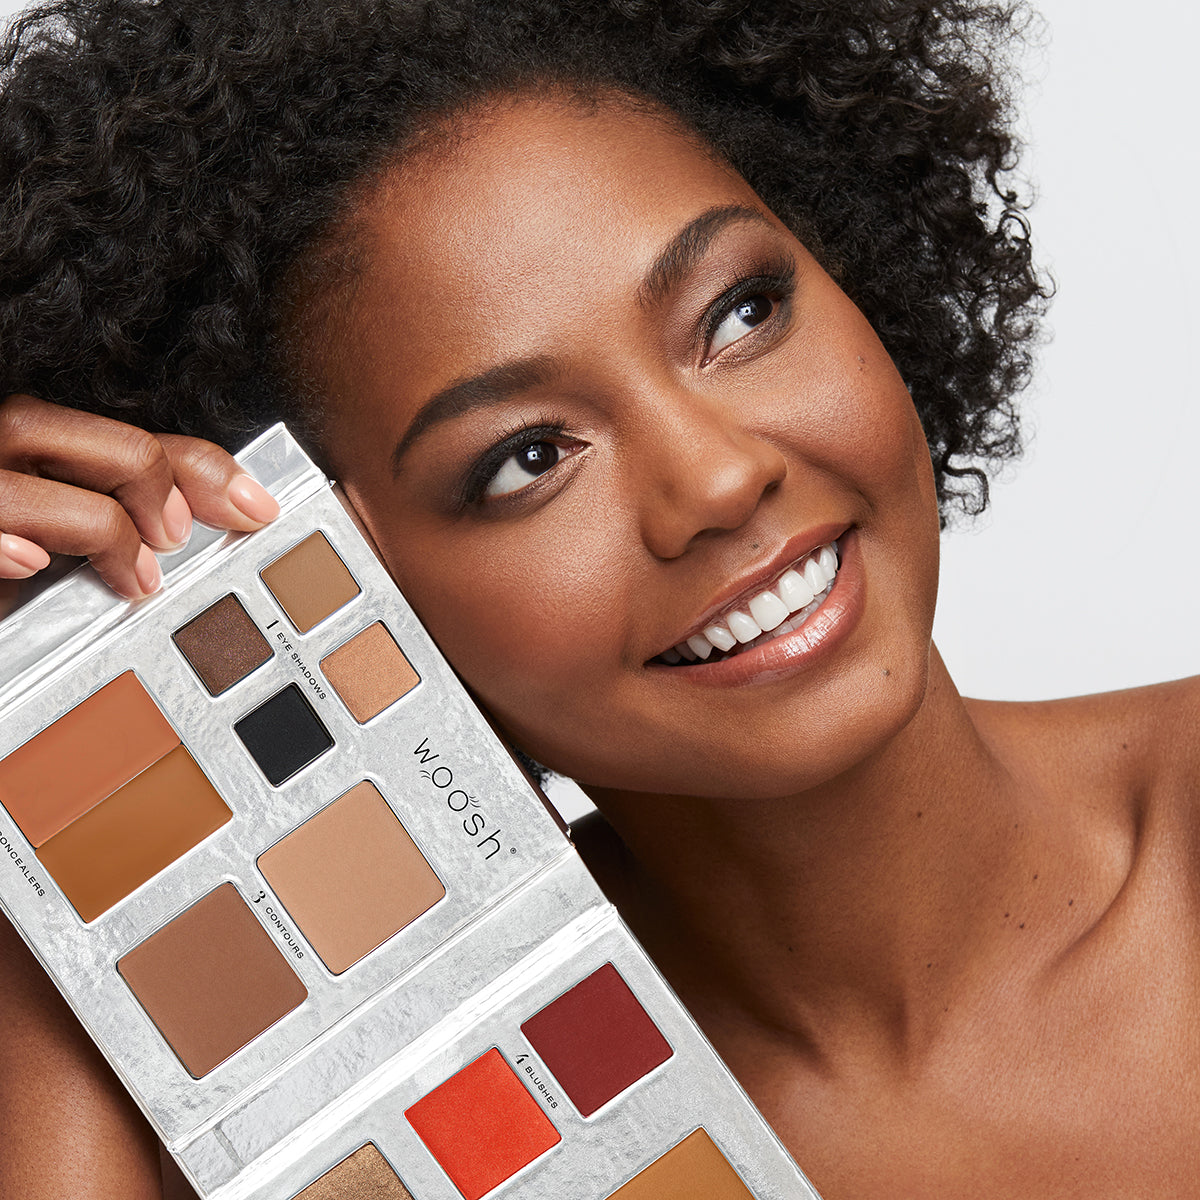 Brunette model holding the 13 pan Fold out Face palette that includes Eyeshadow, cream concealer, contour, blush, highlight, and foundation powders.